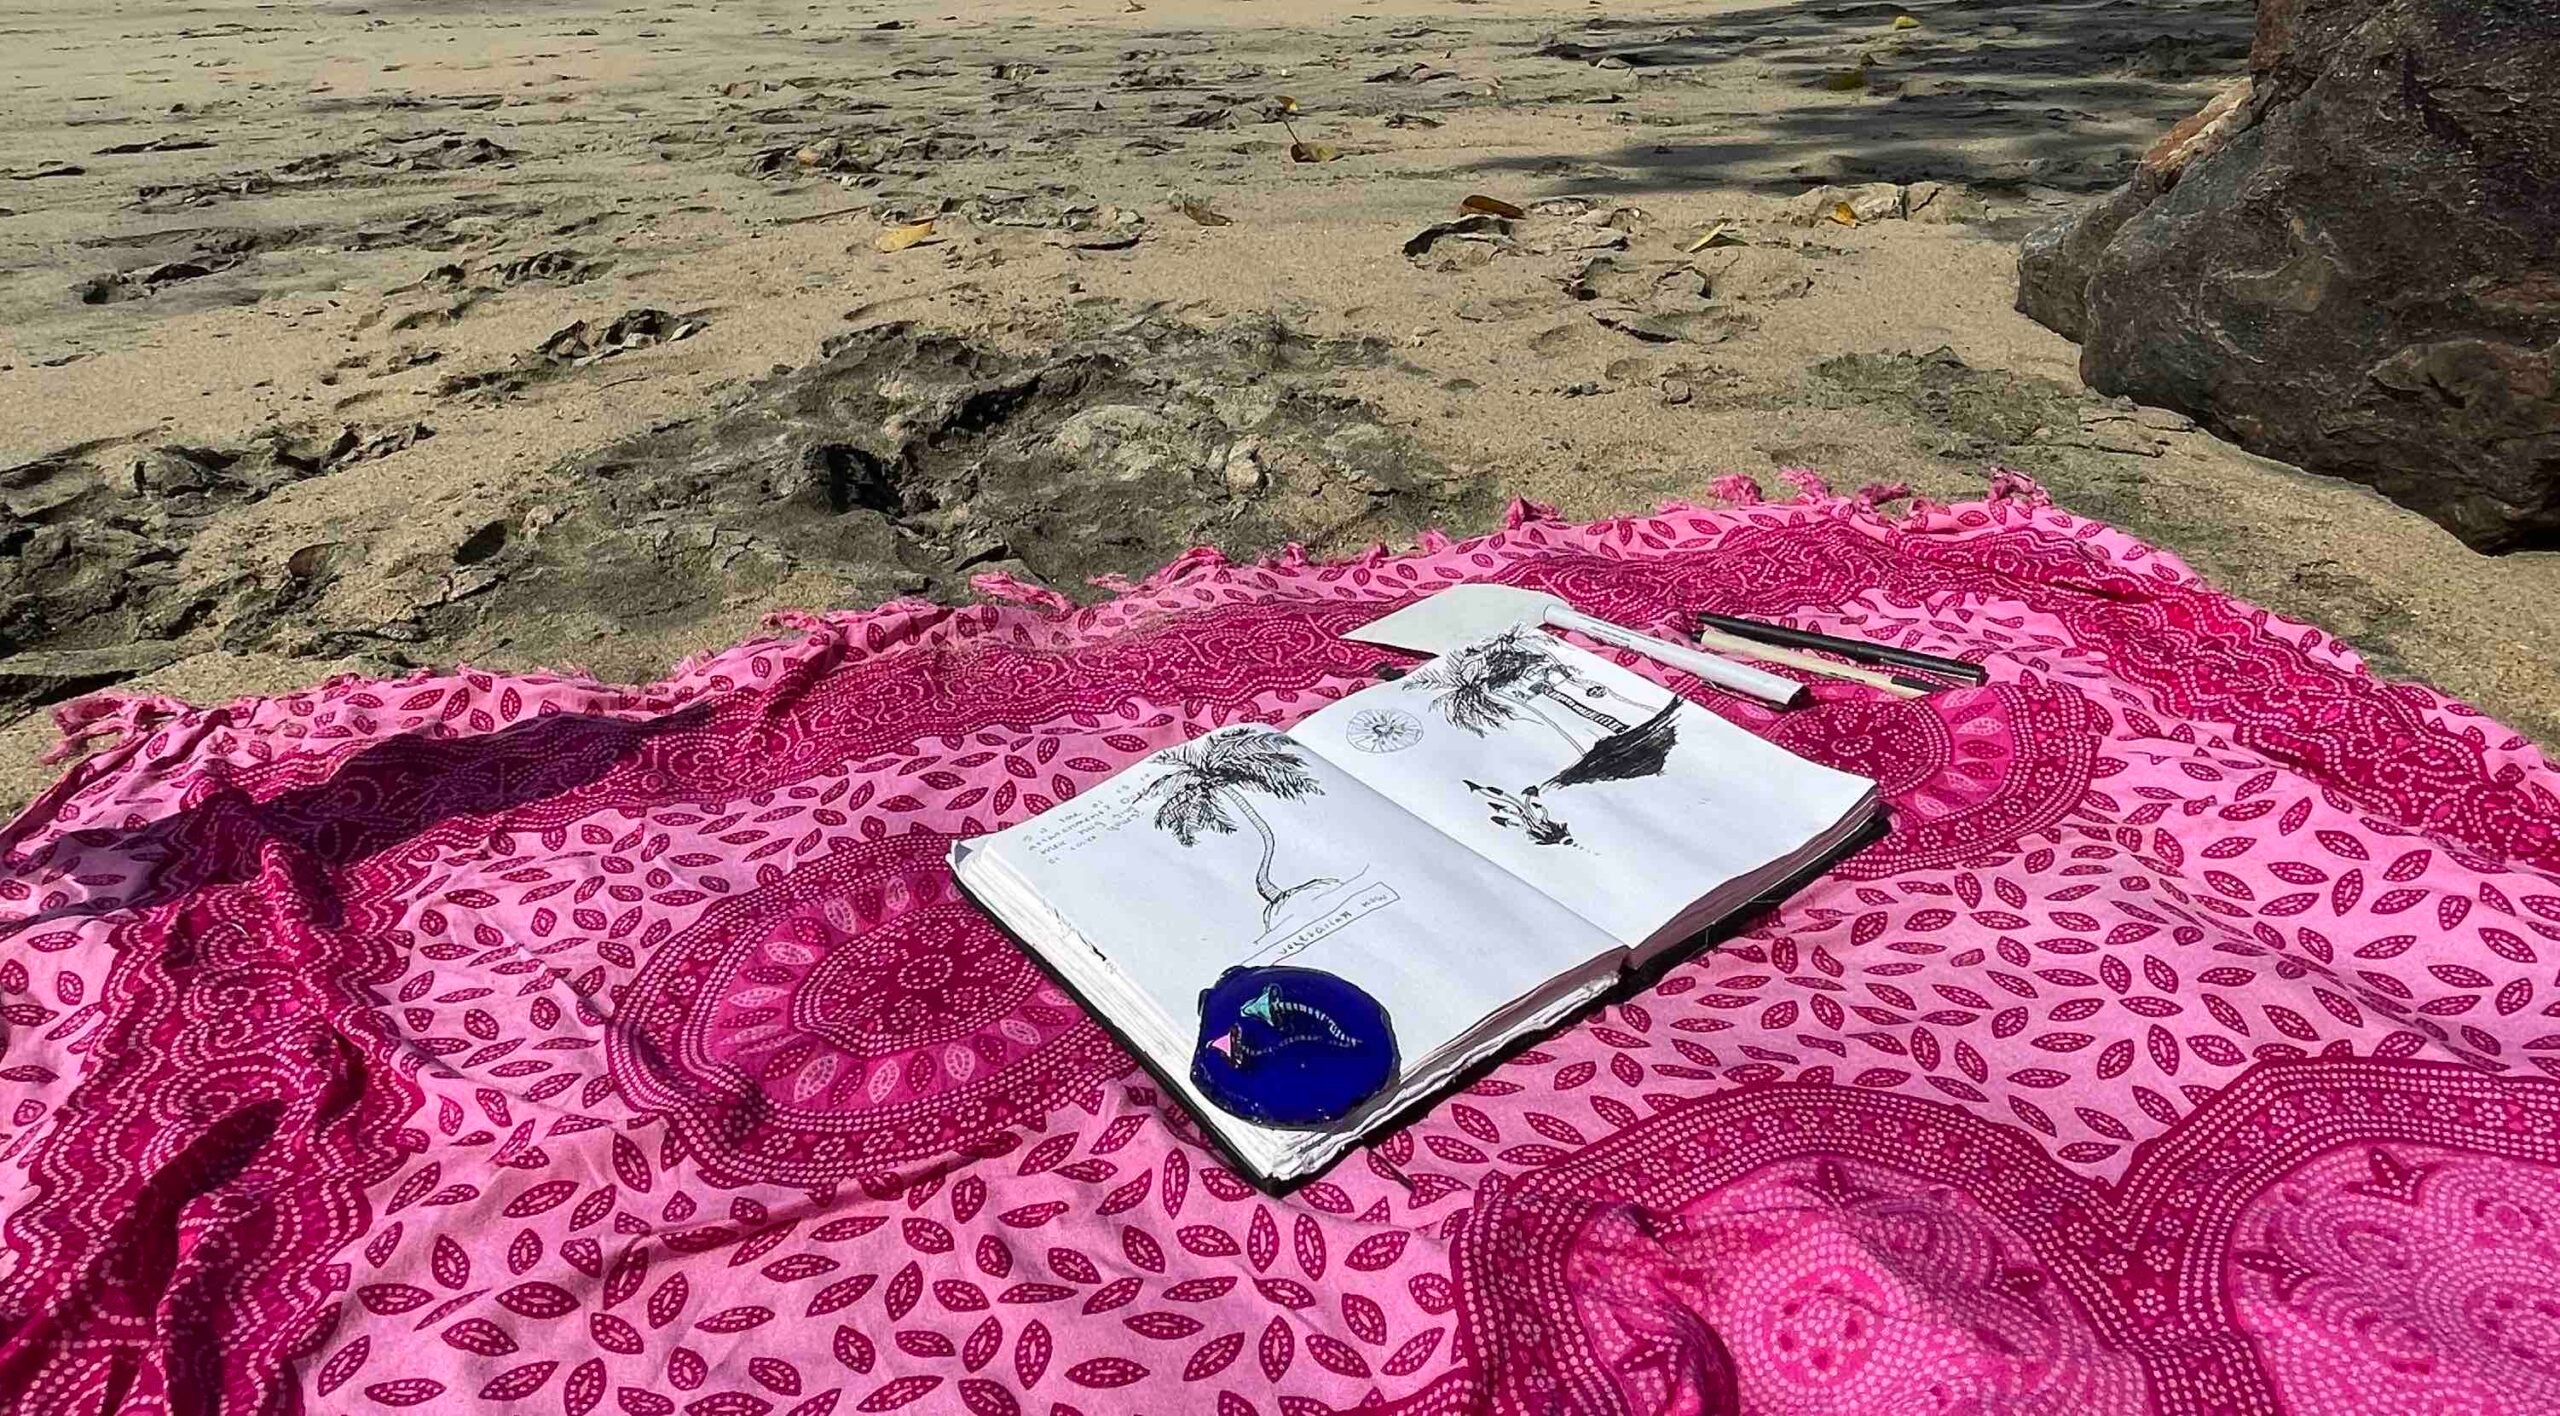 A sketch in a journal of palm trees on a beach in Mexico.